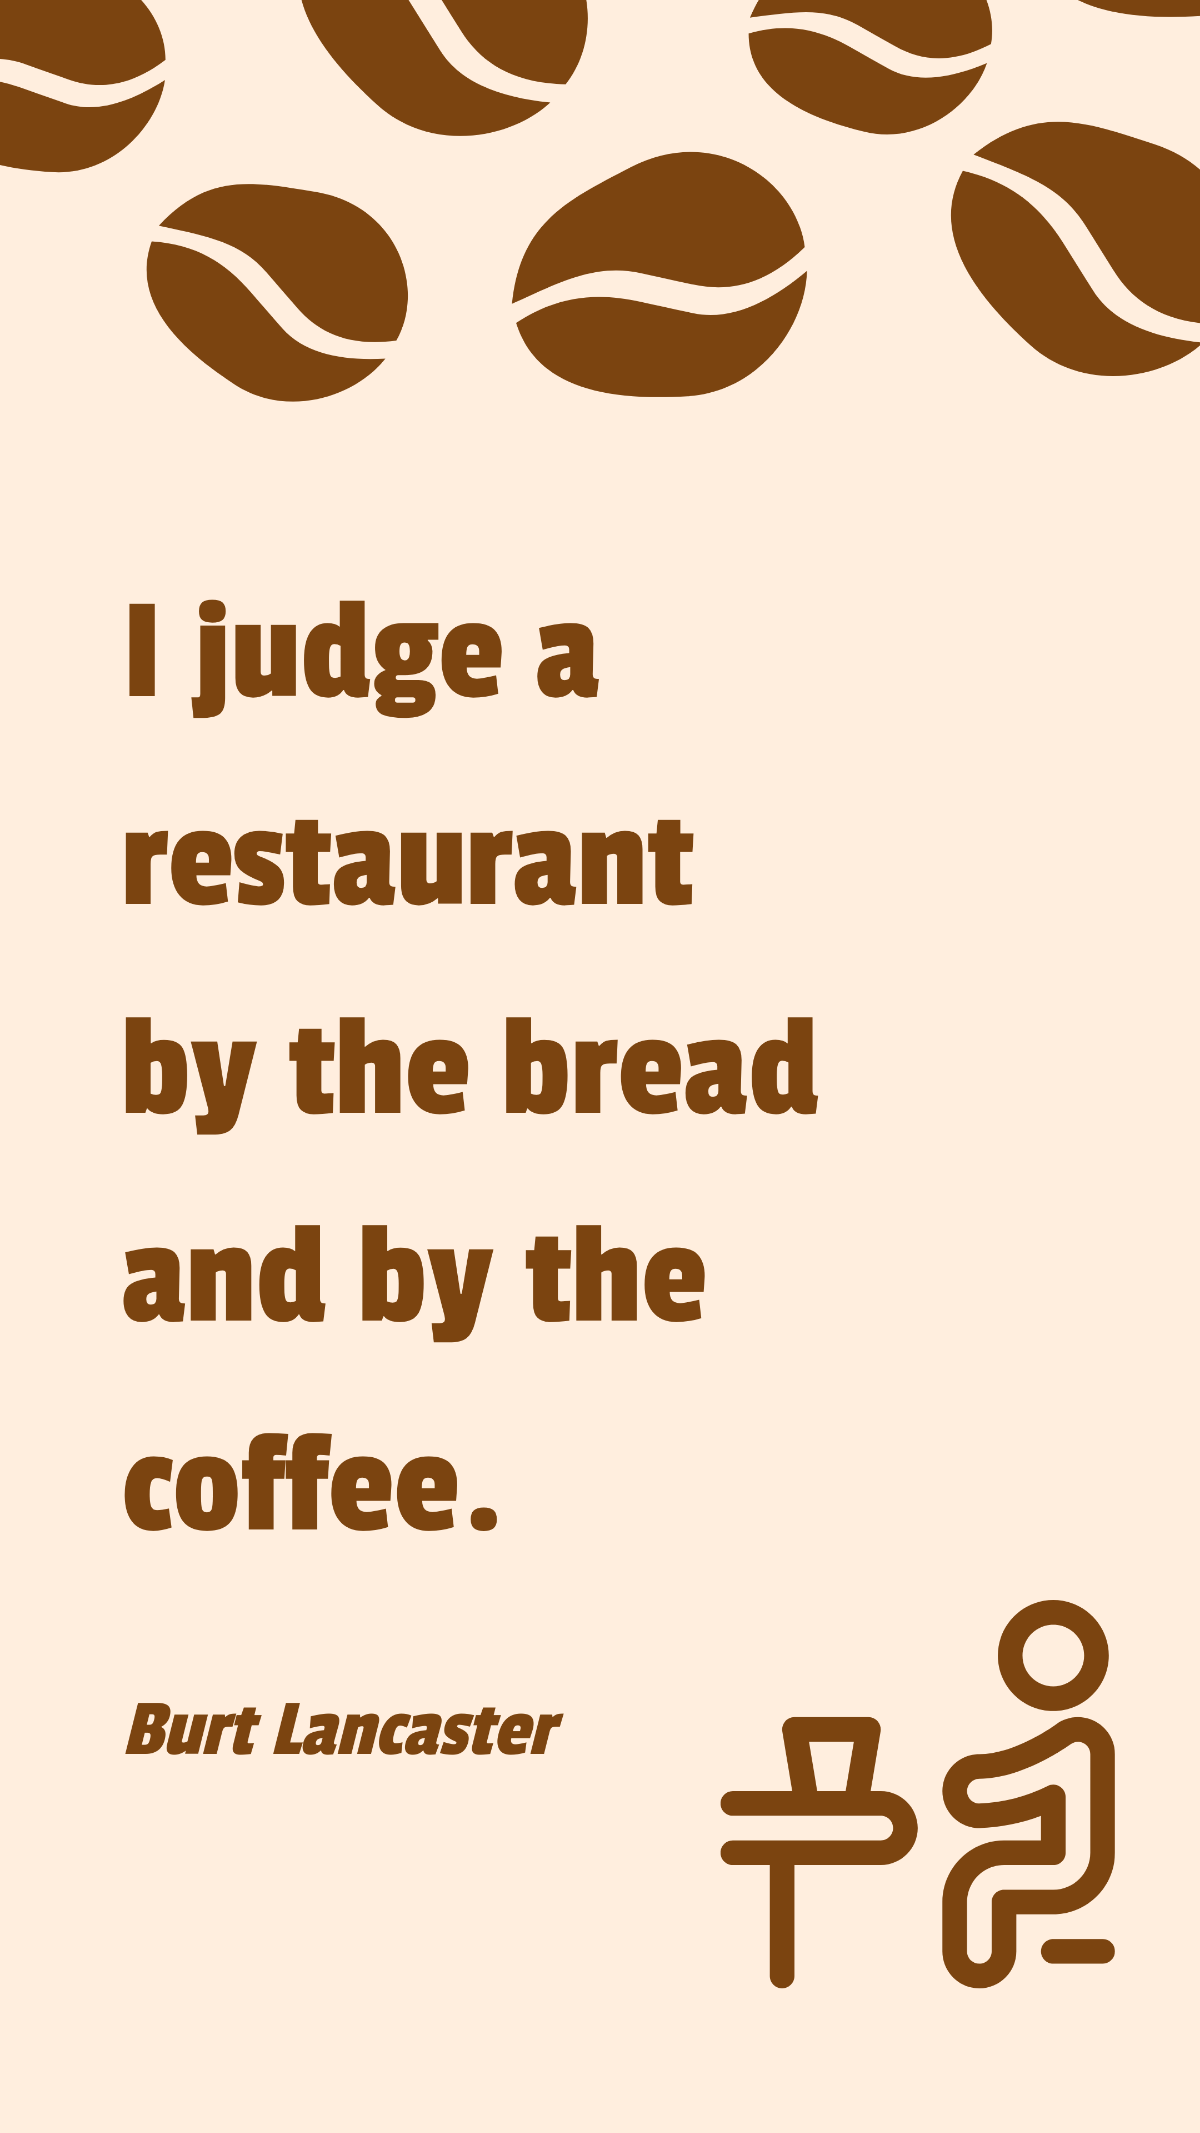 Burt Lancaster - I judge a restaurant by the bread and by the coffee.